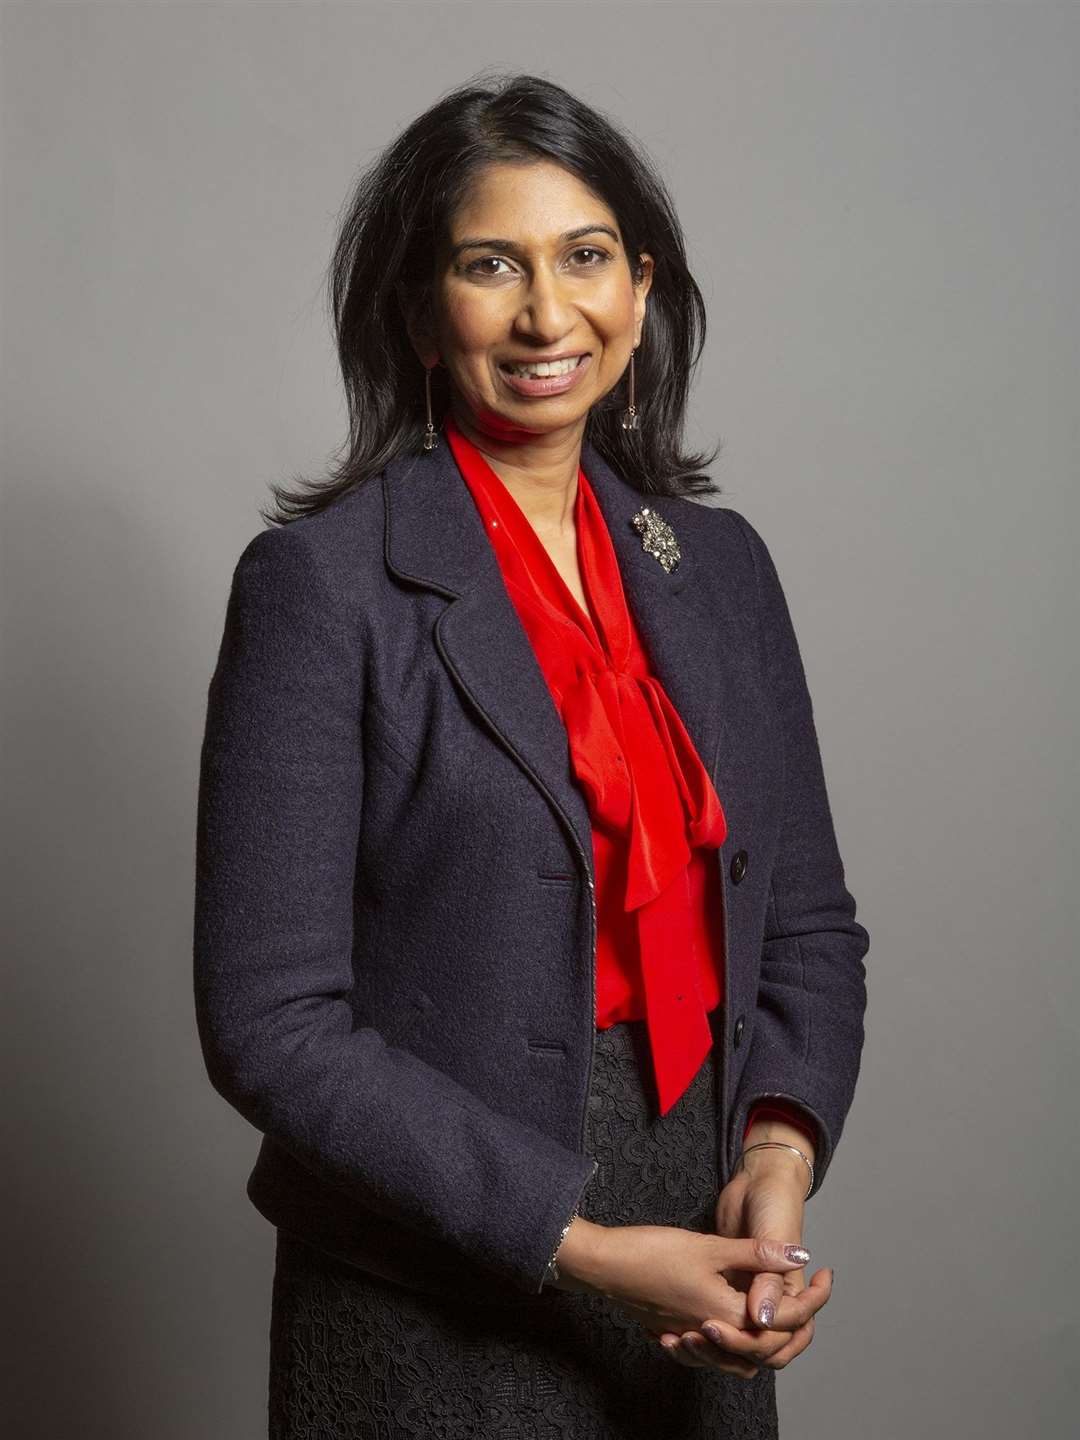 Government sources have said Suella Braverman's decision as Home Secretary led to overcrowding an an outbreak of scabies at Manston airport asylum centre